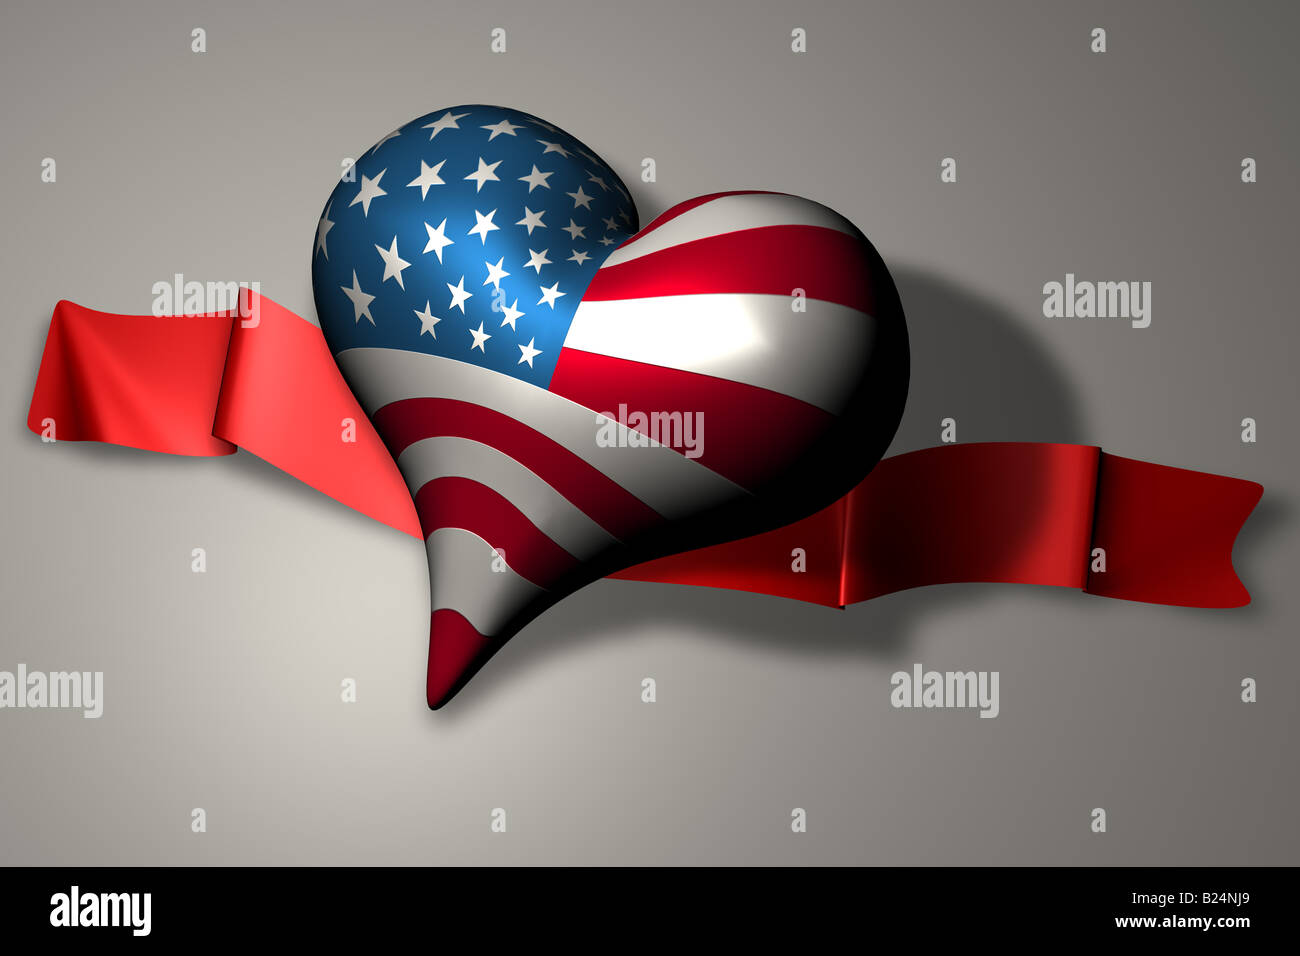 Illustration of a heart with the American flag on it Stock Photo